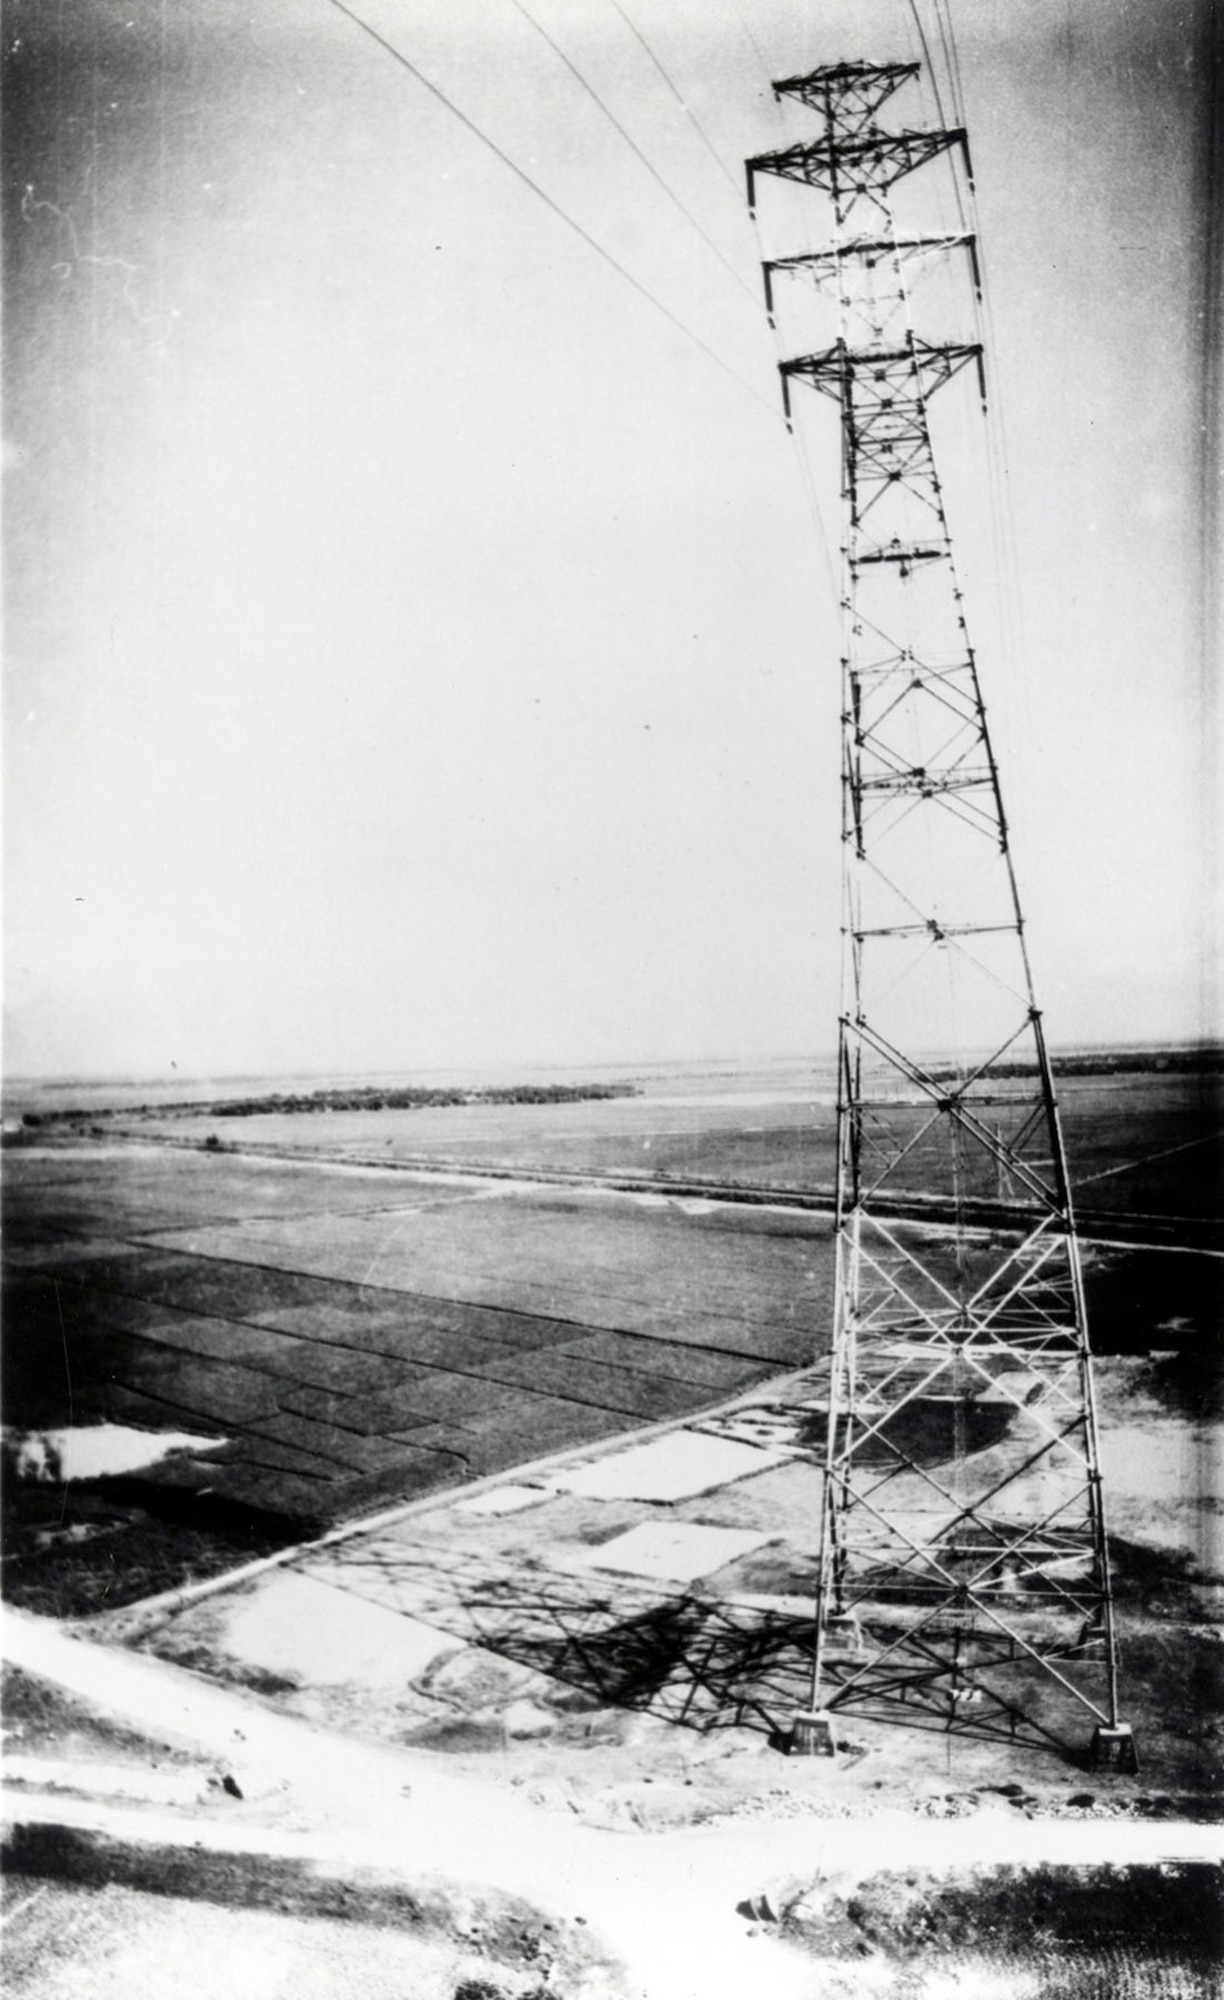 An AQM-34L took this photograph as it flew underneath electrical lines in North Vietnam. The image distortion was a normal effect caused by the type of lens used. (U.S. Air Force photo)